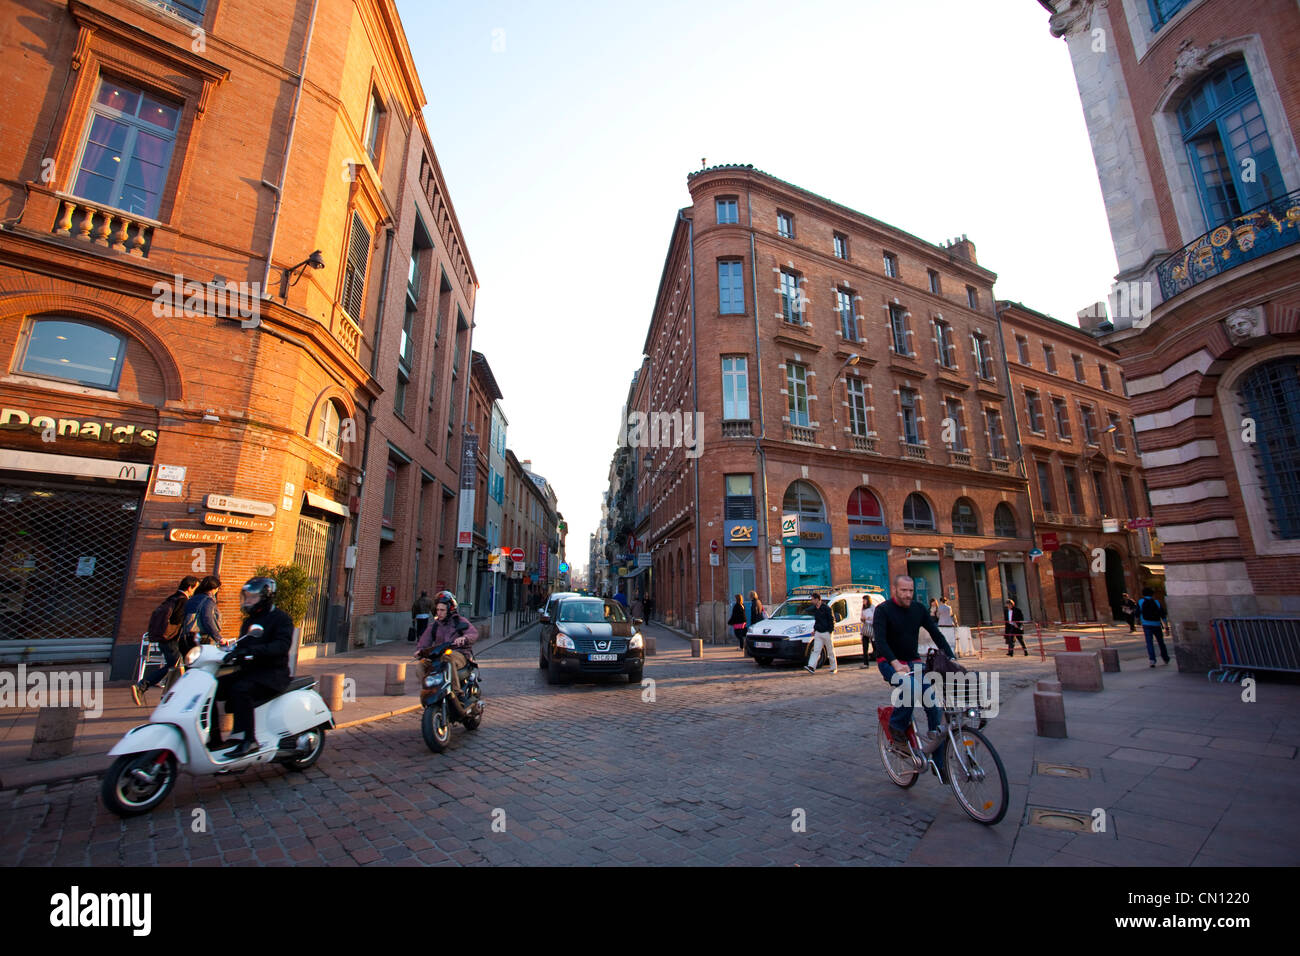 French people on their way to work in the early morning at Place du Capitole, Toulouse, France Stock Photo